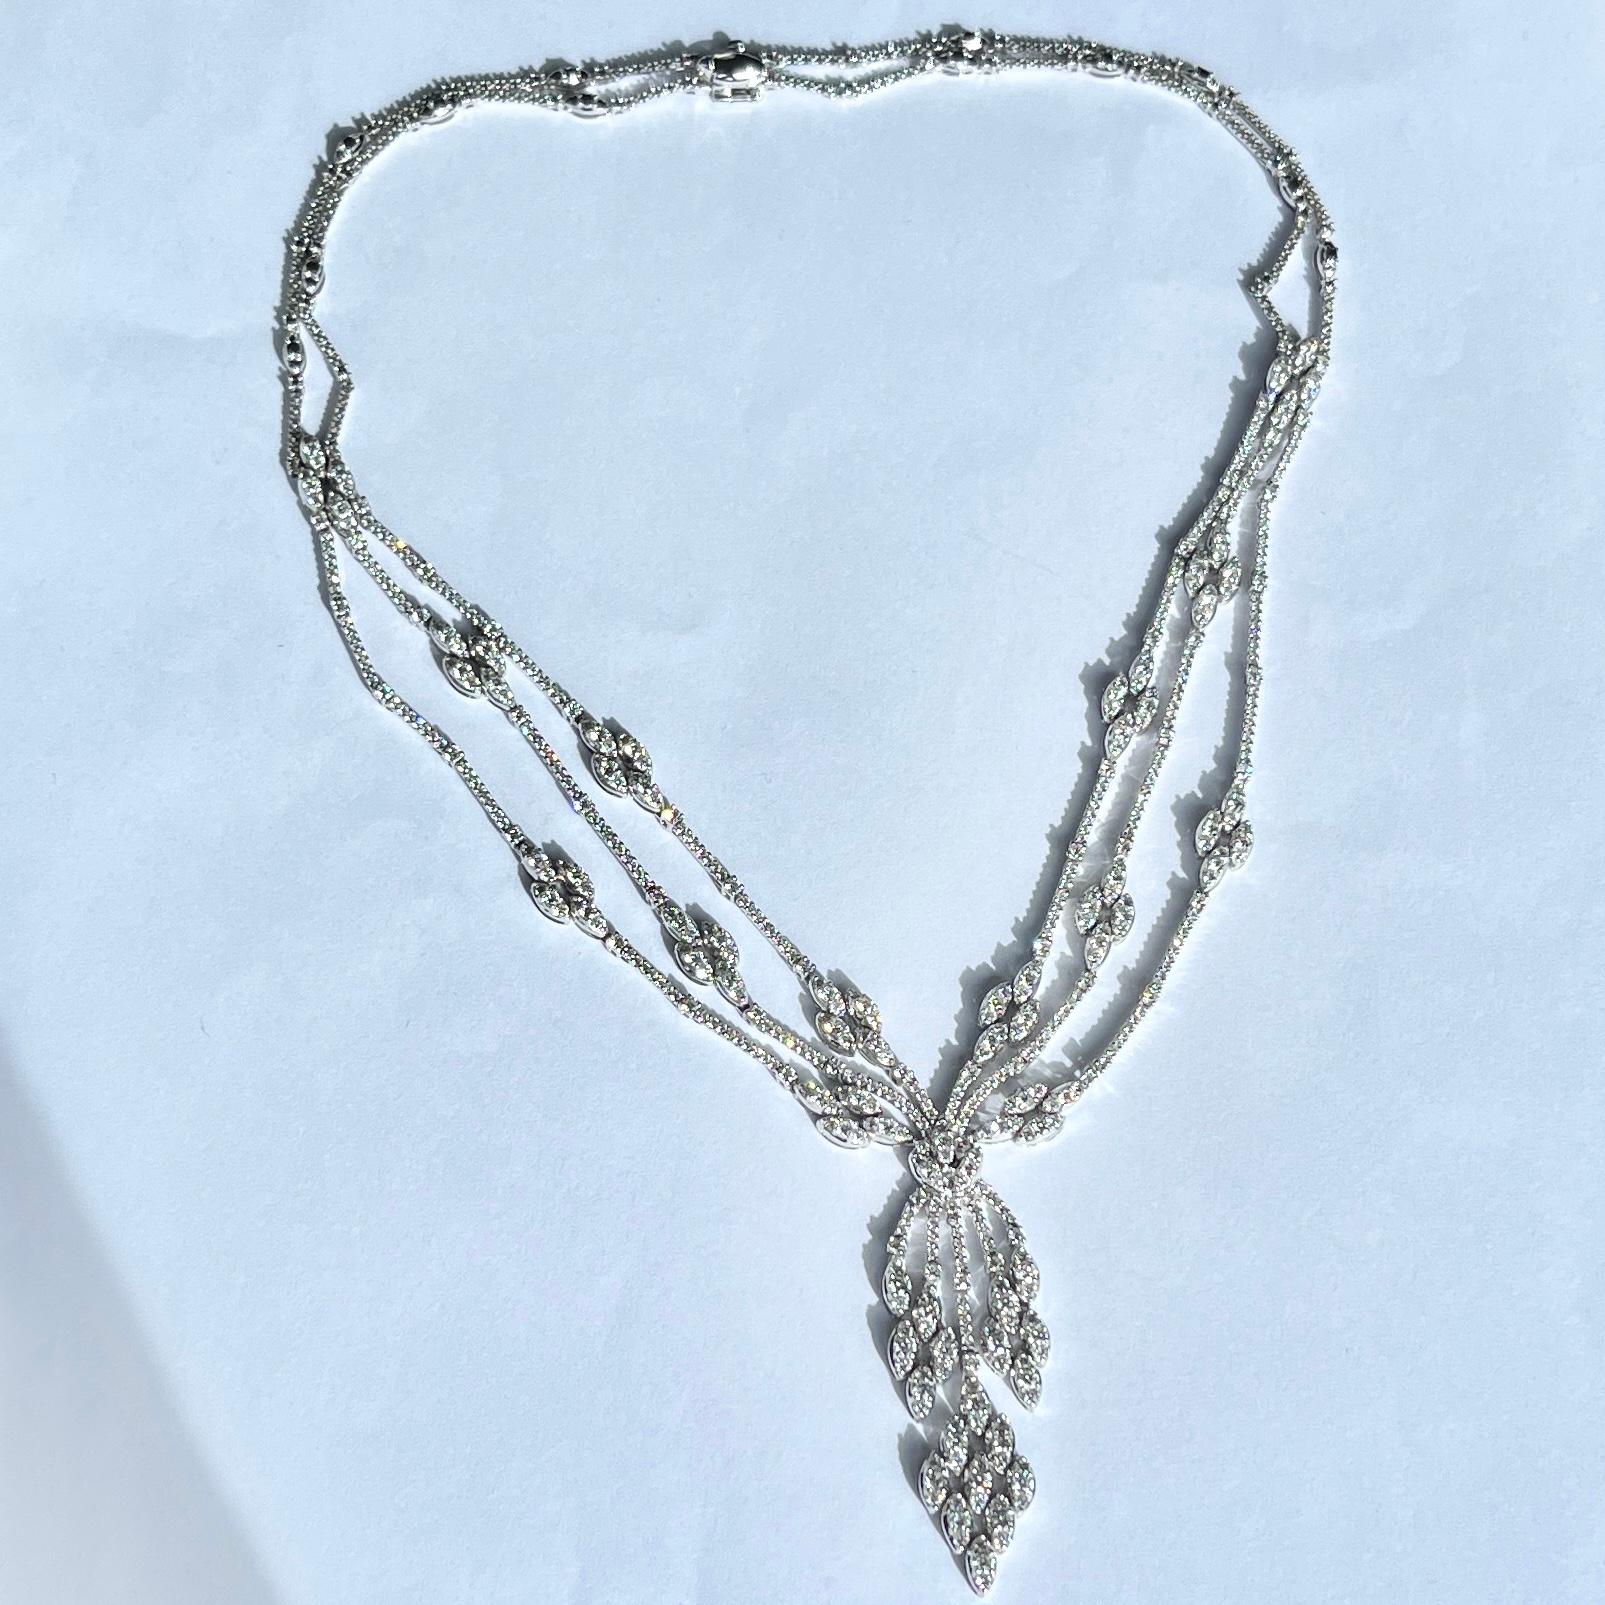 Modern 18 Carat White Gold and Diamond Encrusted Pendant Necklace In Excellent Condition For Sale In Chipping Campden, GB